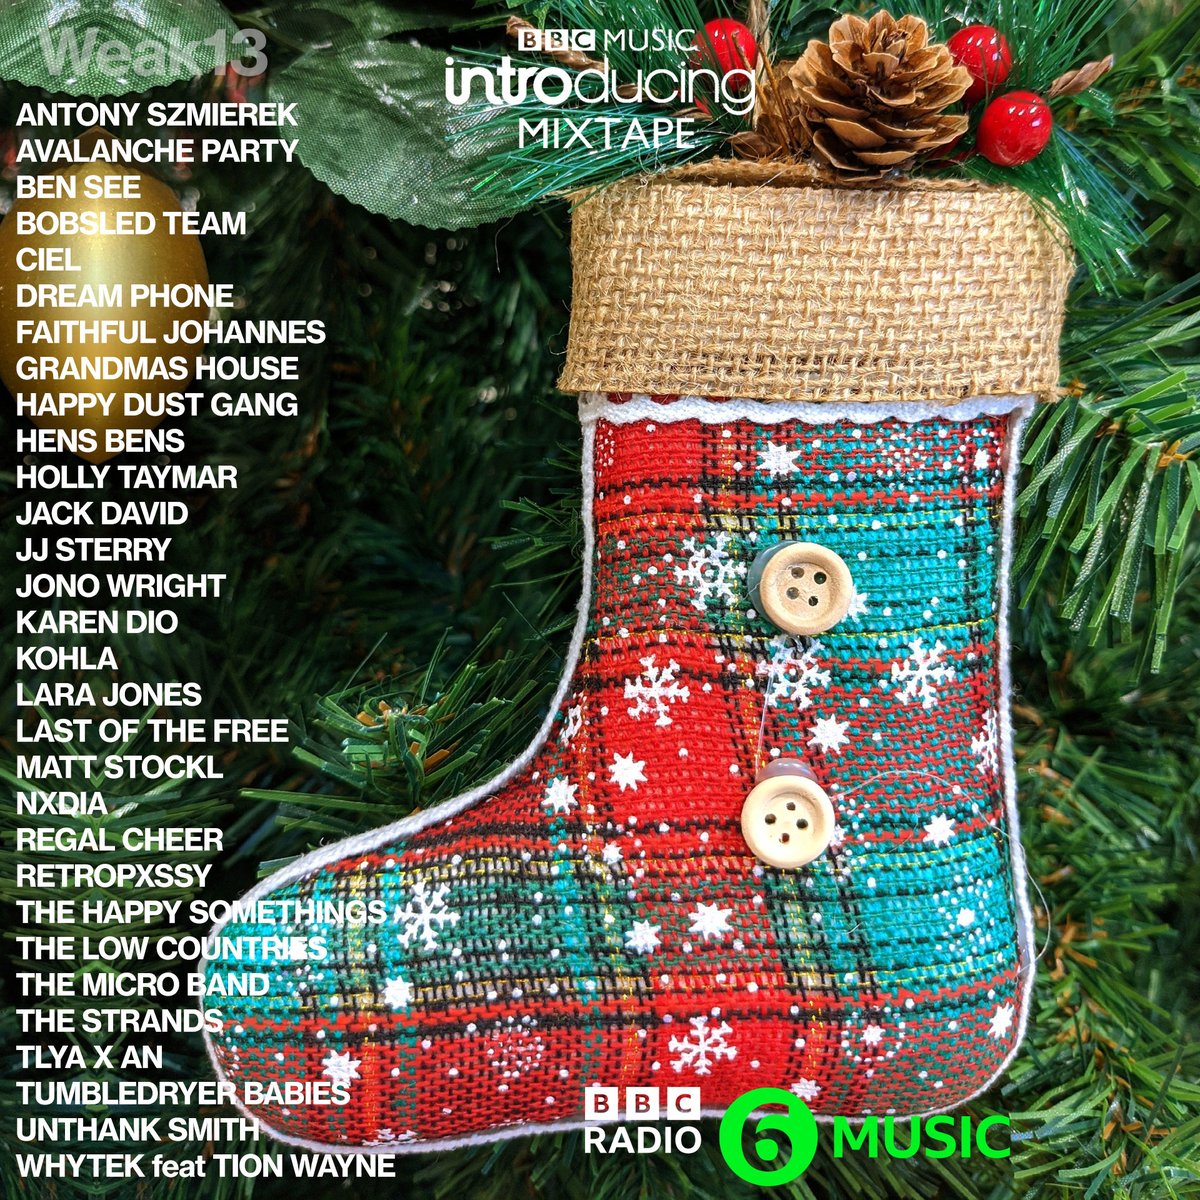 My Christmas Stocking edition of the @BBCIntroducing Mixtape contains 30 miniature sonic delights handwrapped by Tom Robinson. It drops this Monday (Xmas Day) across all podcast platforms including @BBCSounds - and on @BBC6Music. See bbc.co.uk/blogs/introduc… for full tracklist.